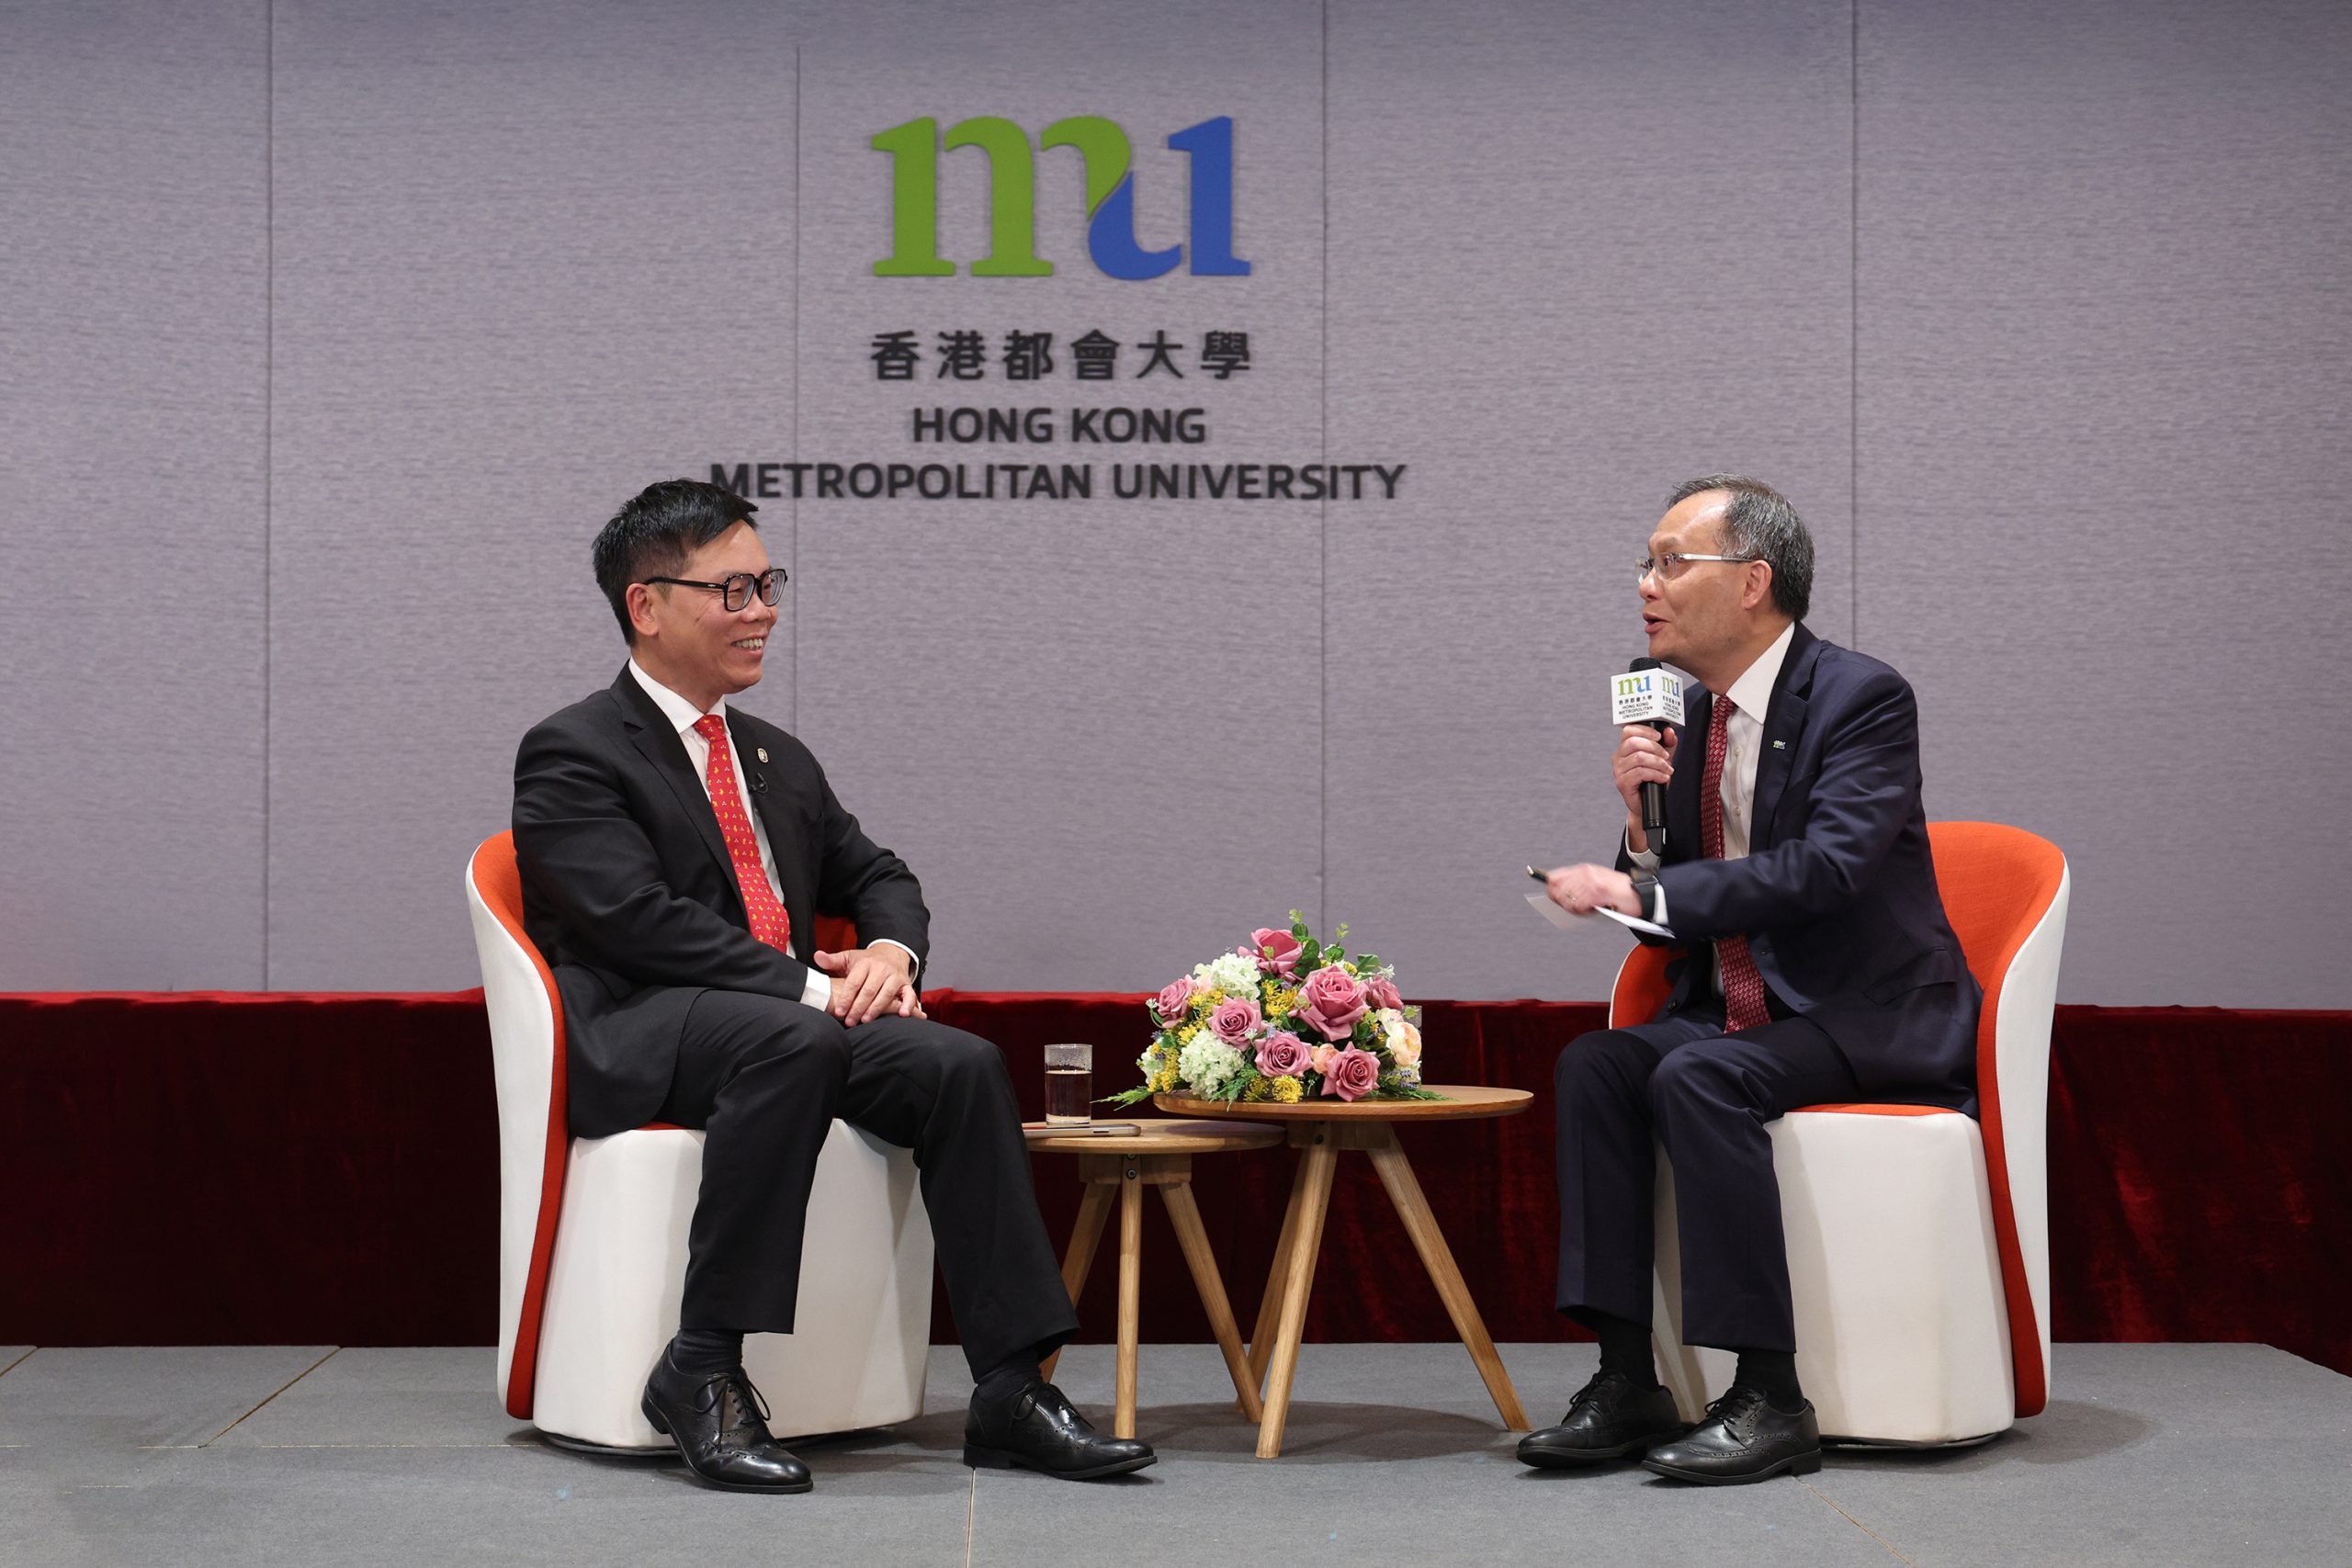 The participants enthusiastically ask questions during the question-and-answer session hosted by HKMU President Prof. Paul Lam Kwan-sing (right).